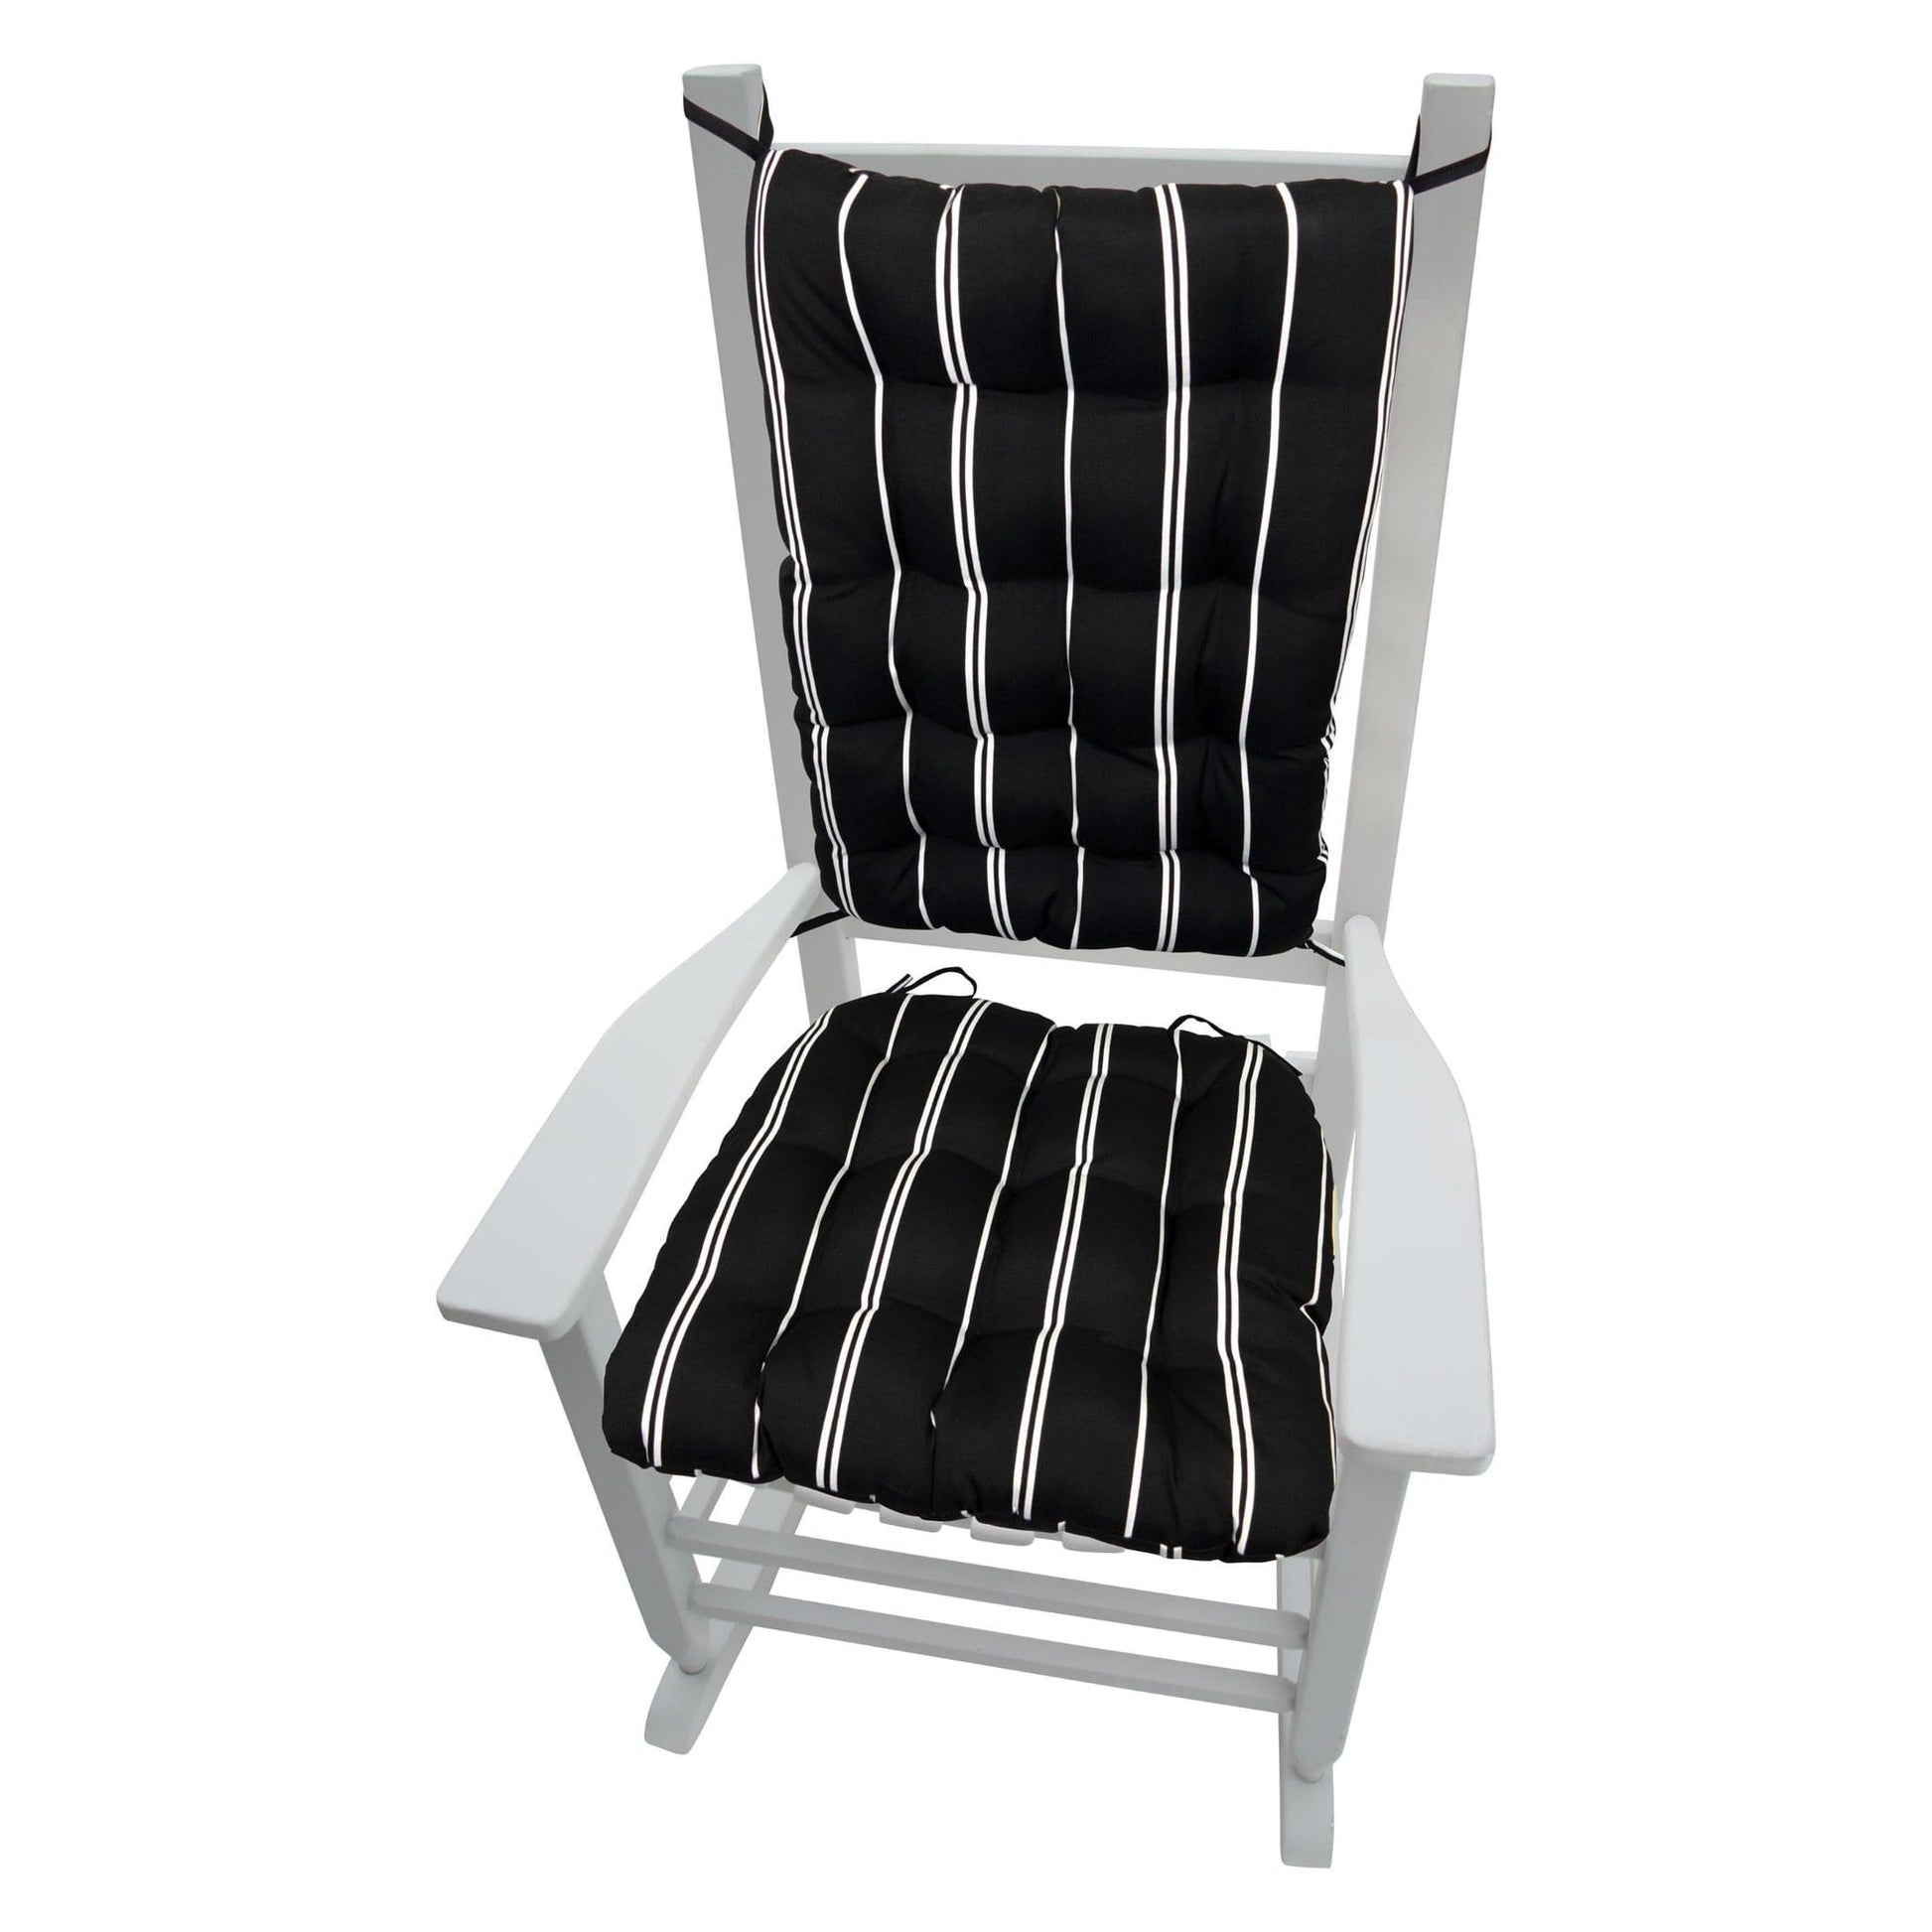 Pursuit indoor outdoor rocking chair cushions - barnett home decor - black and white striped